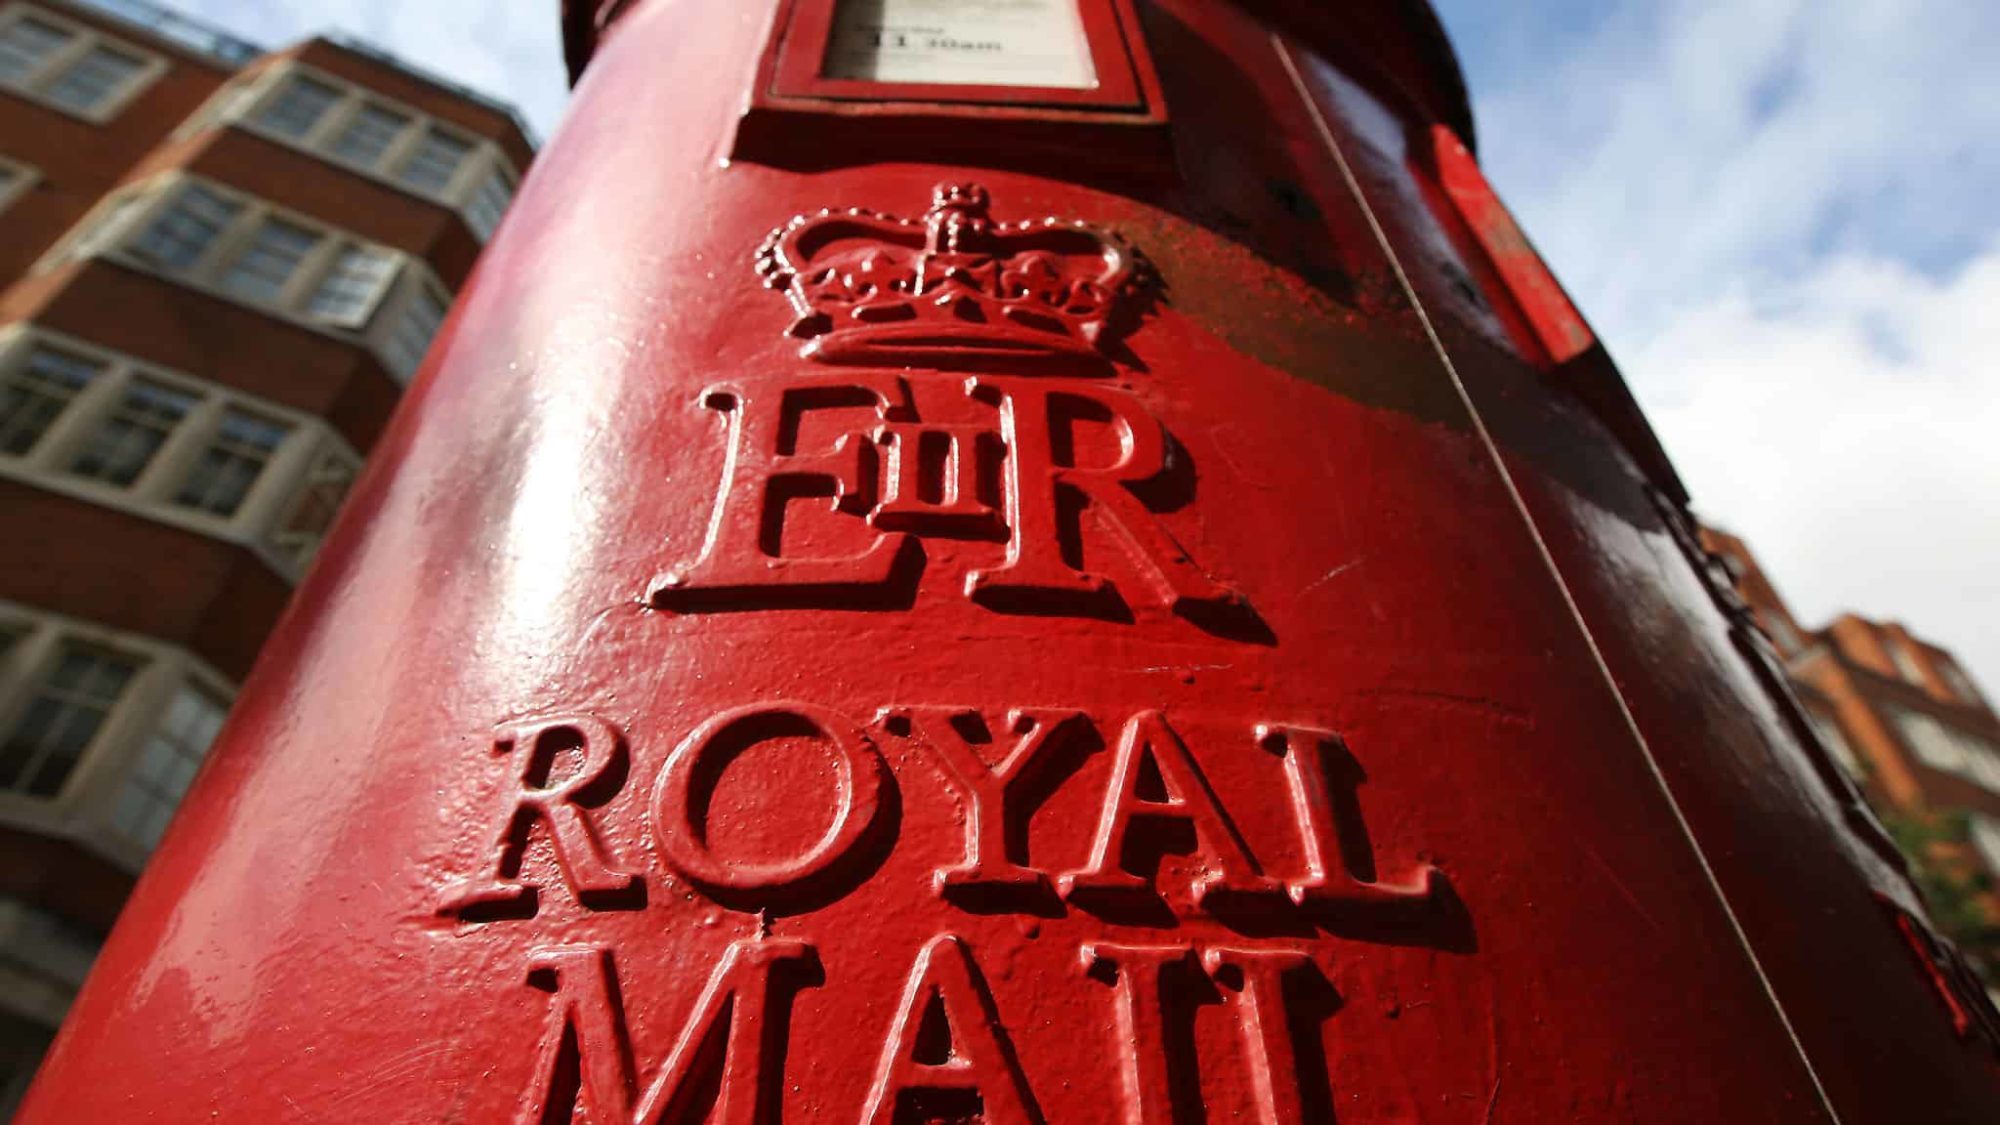 Royal Mail strike comes as delivery delays already increasing